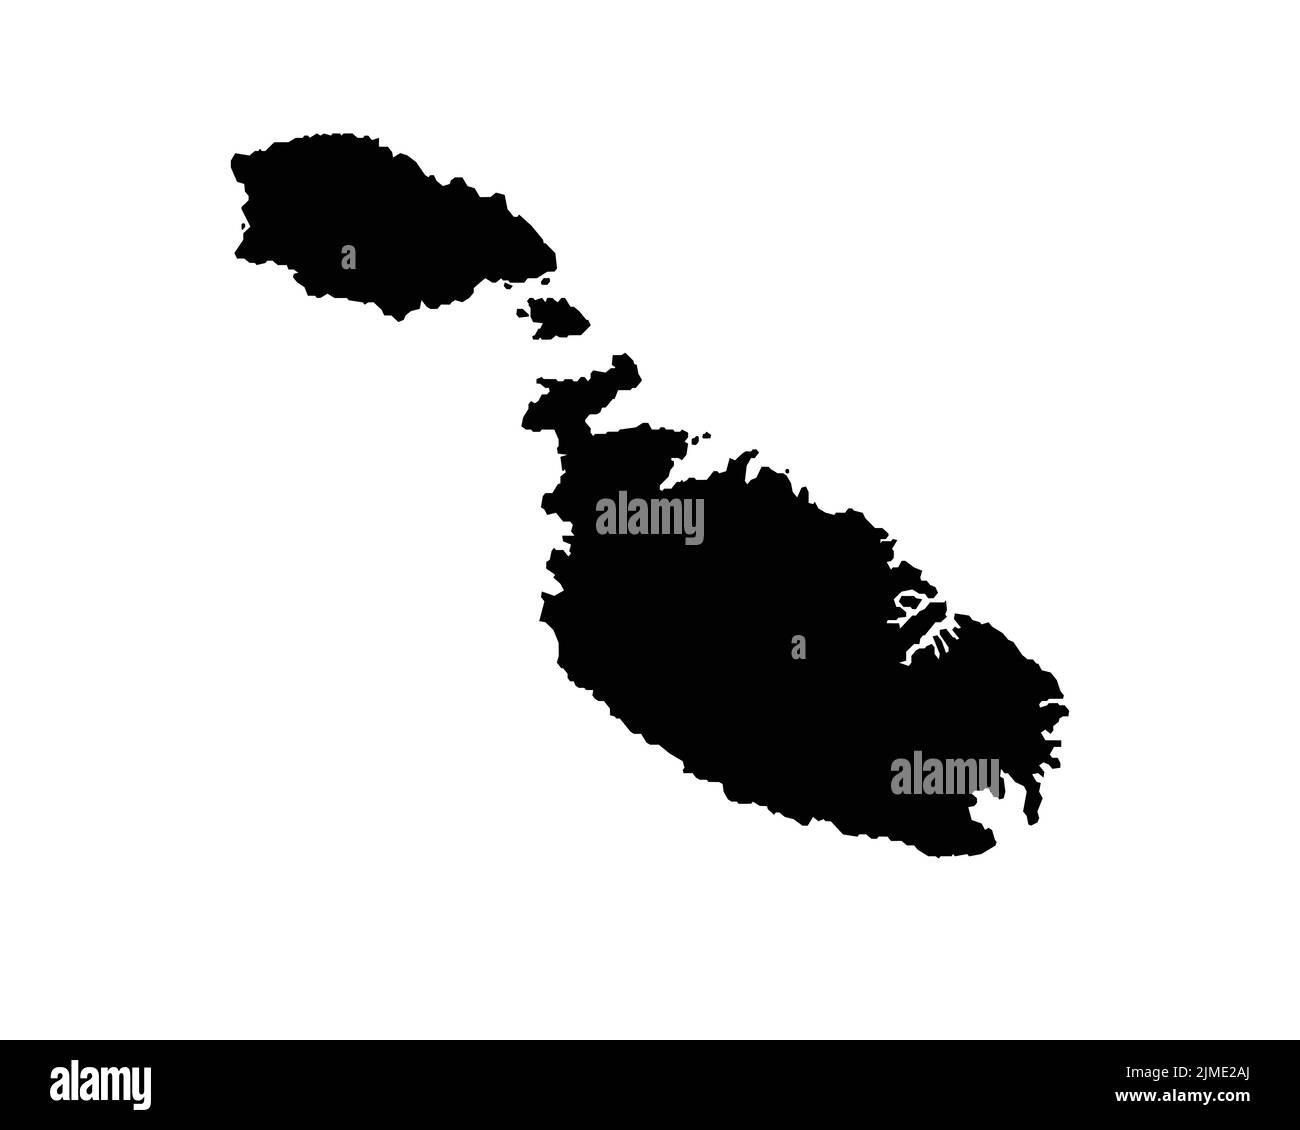 Malta Map. Maltese Country Map. Black and White National Nation Outline Geography Border Boundary Shape Territory Vector Illustration EPS Clipart Stock Vector